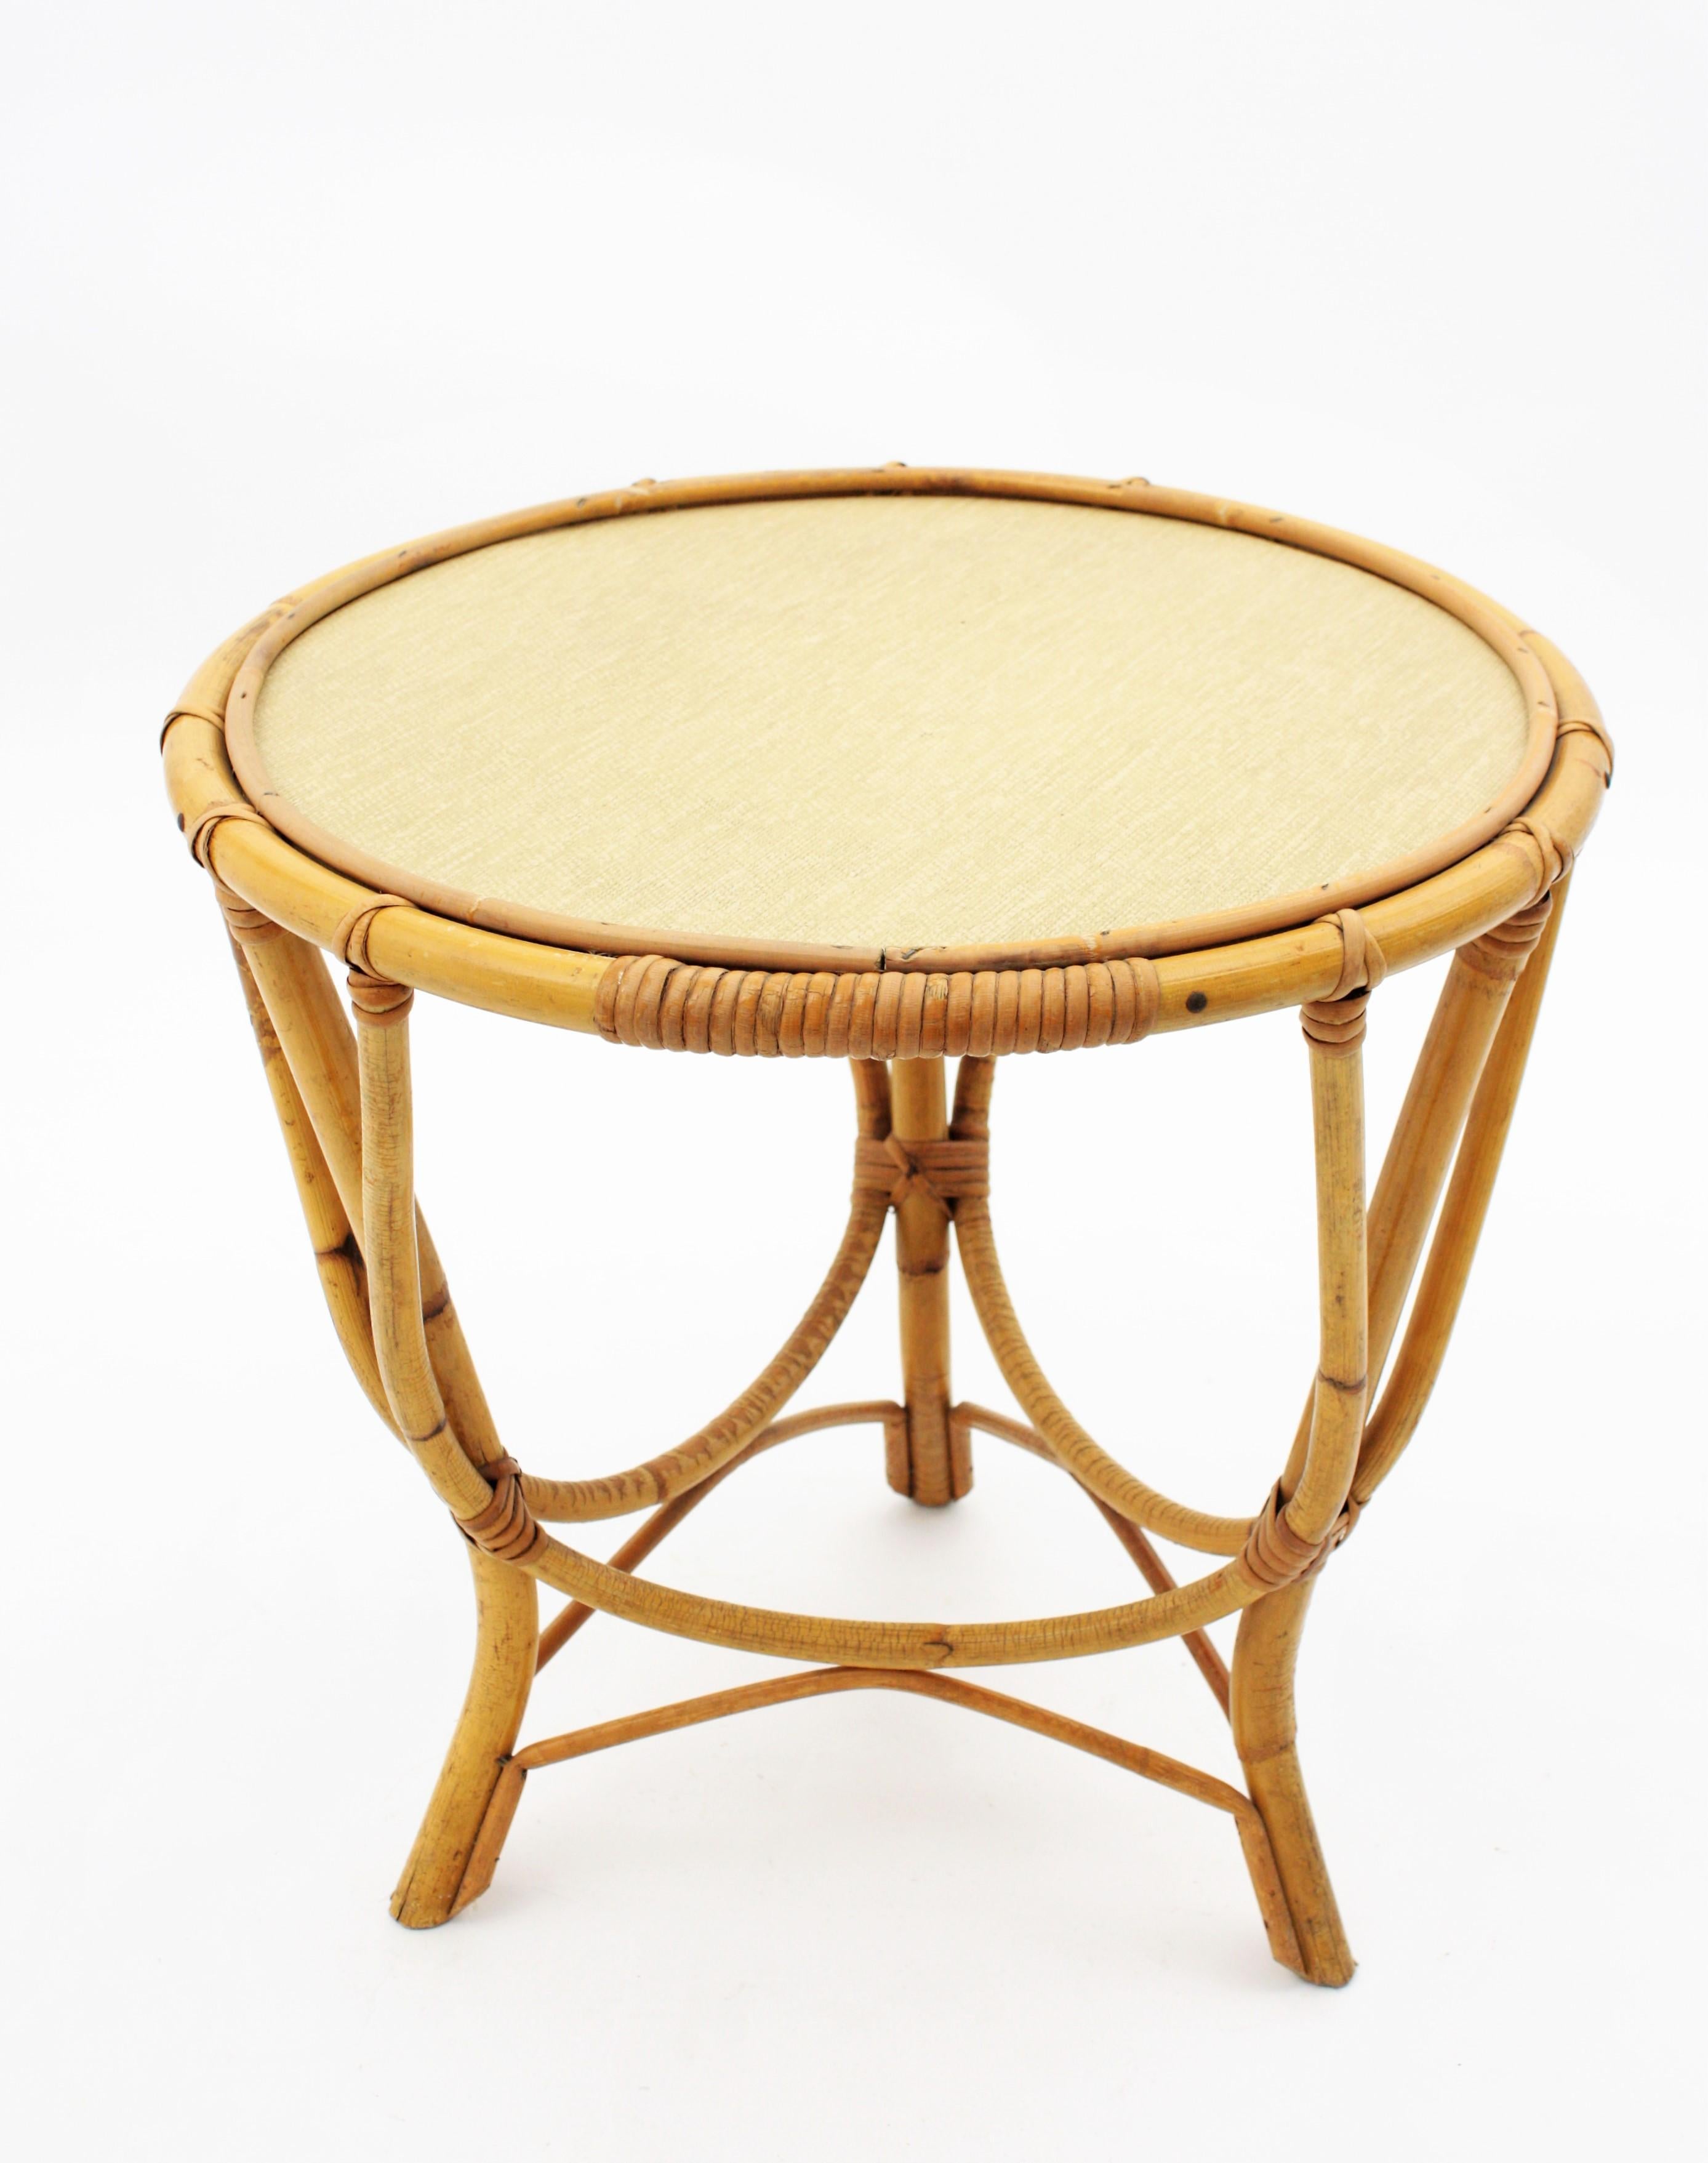 European Bamboo and Rattan Albini Inspired Side Table, Spain, 1960s